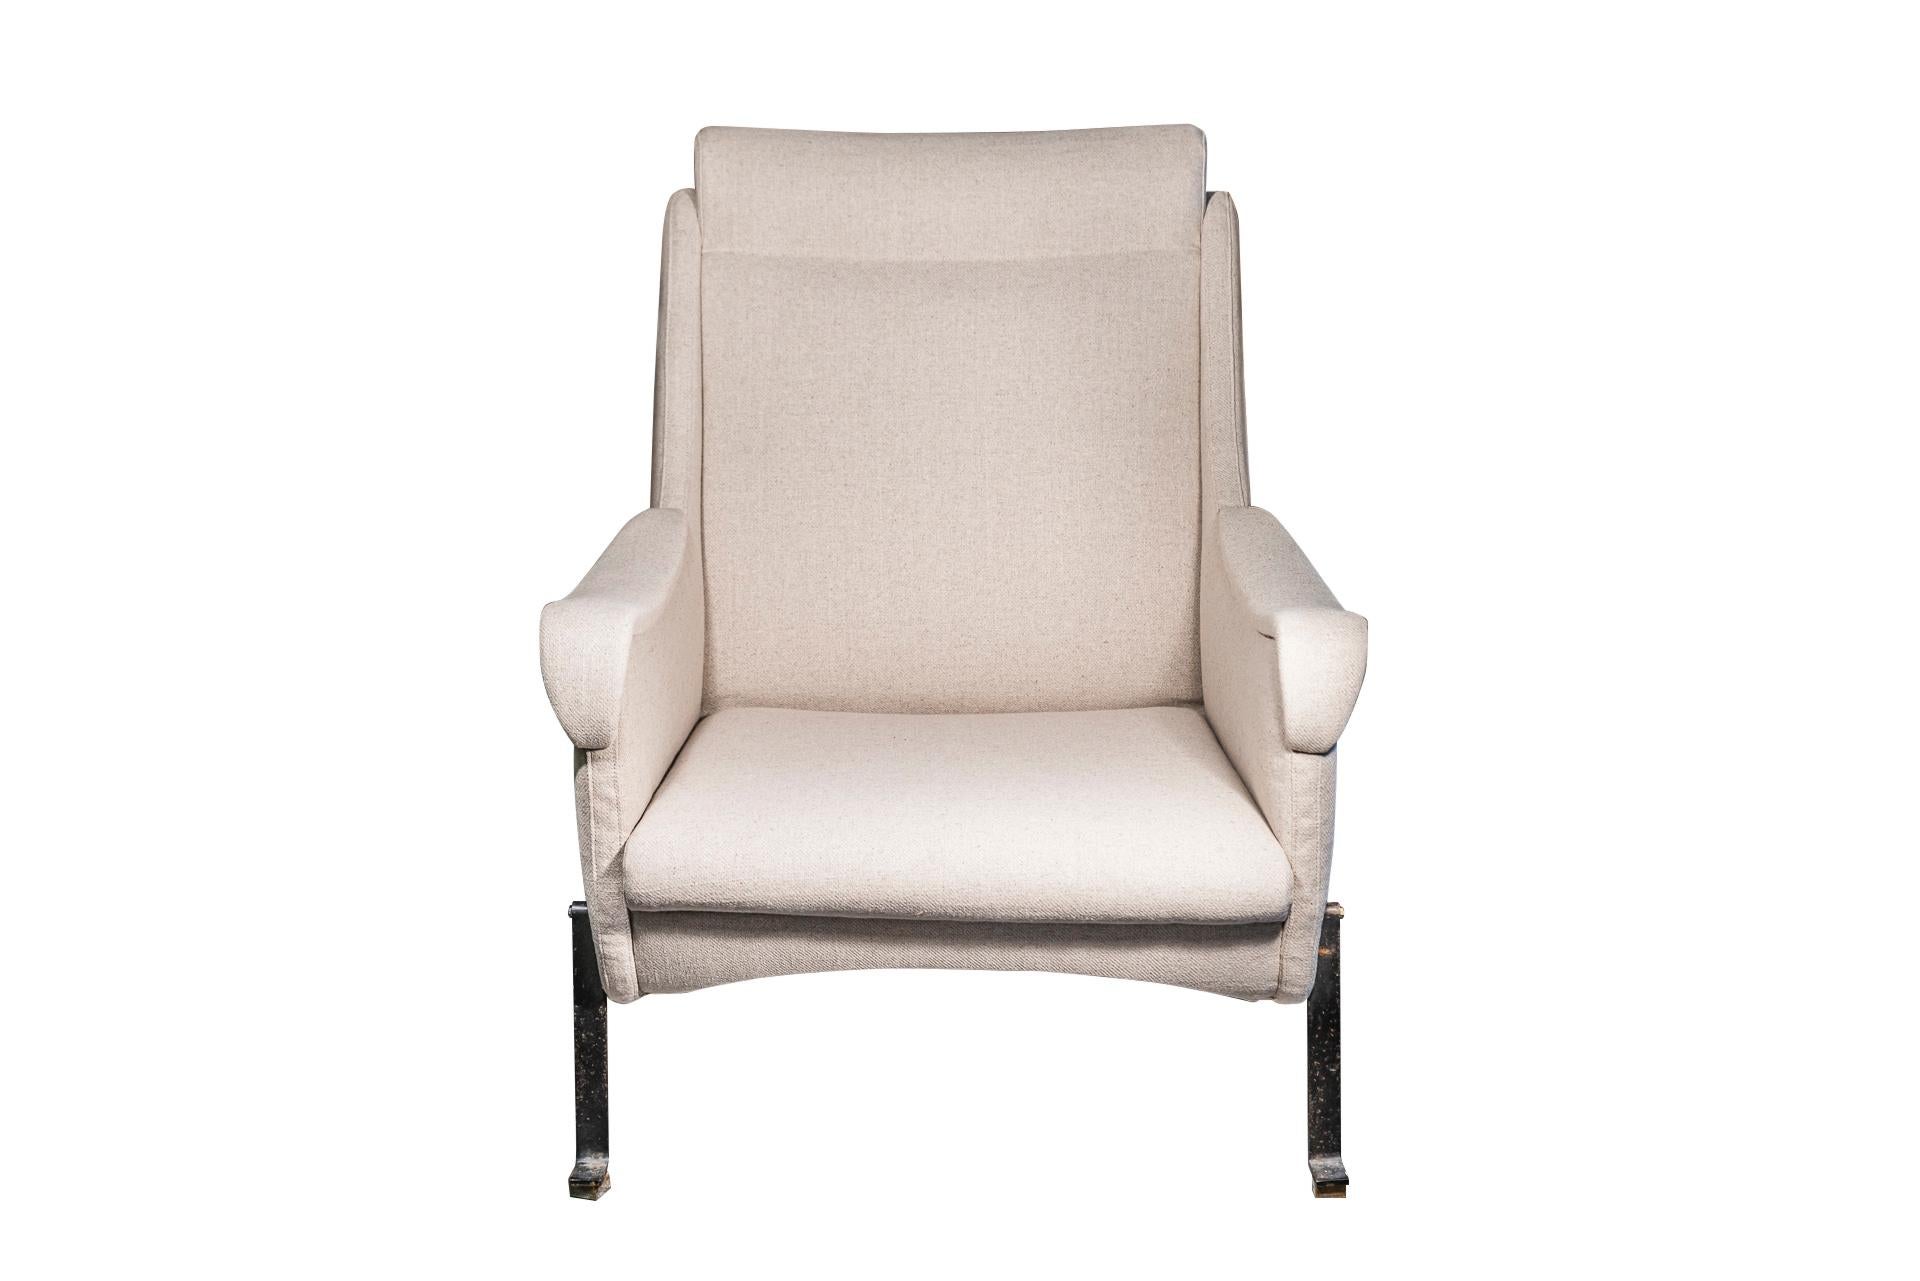 Gigi Radice, 
Pair of armchairs,
Iron and fabric,
Wear consistent with age and use,
Italy, circa 1960.

Measures: Height 91 cm, depth 80 cm, width 72 cm.